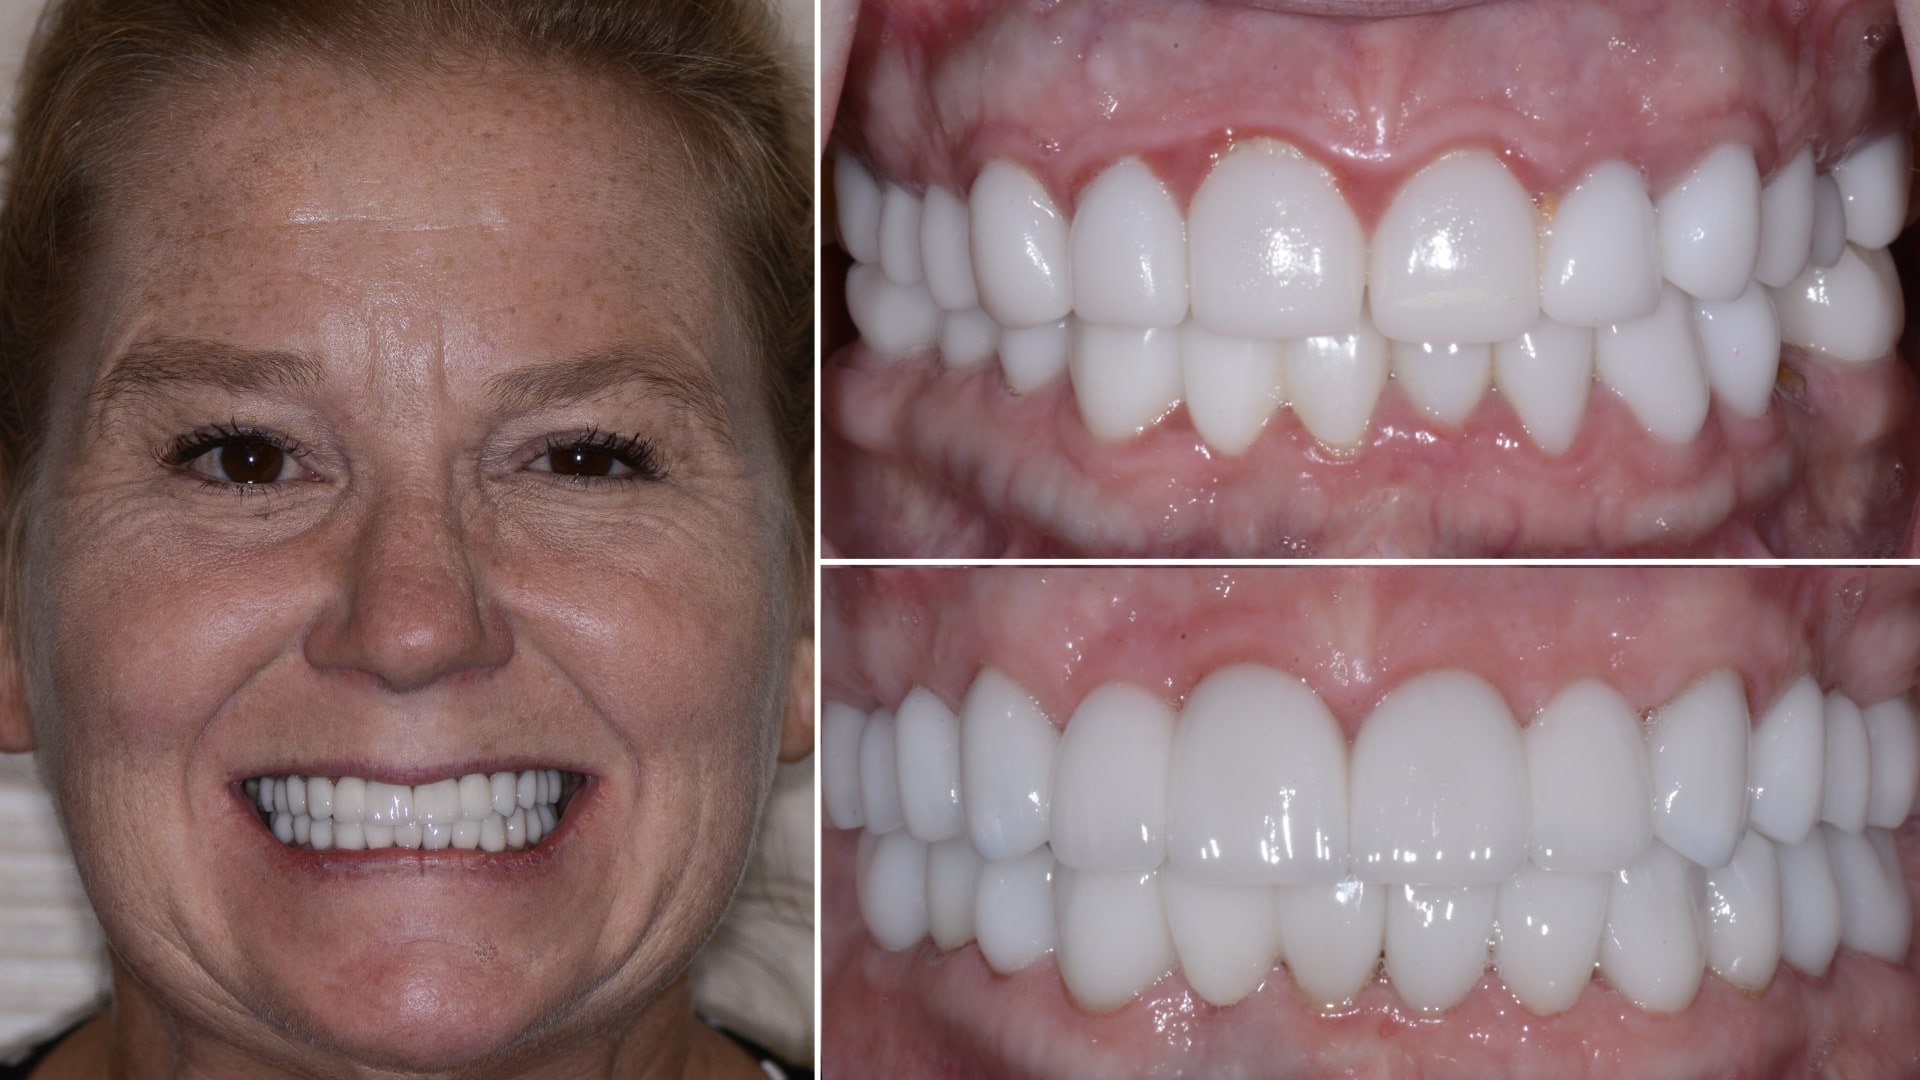 Woman's smile before and after treatment to address uneven gum line